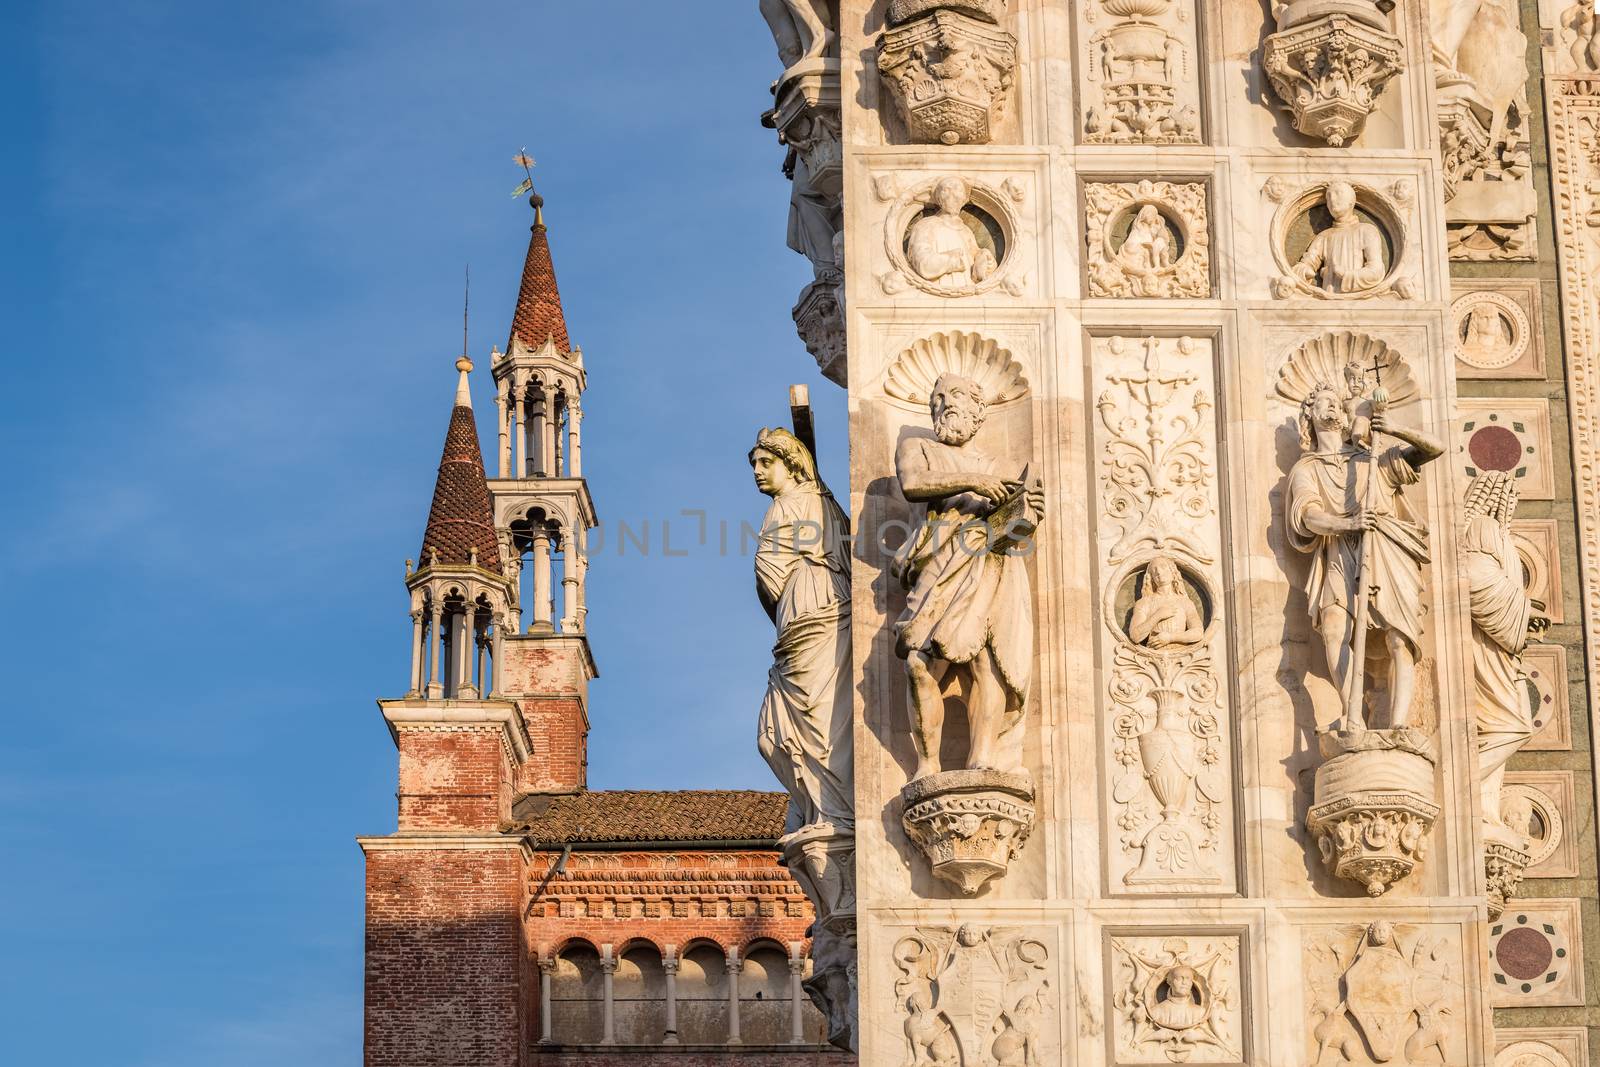 Awesome marble statues from the Renaissance period of the Pavia Carthusian monastery at sunset,Italy.